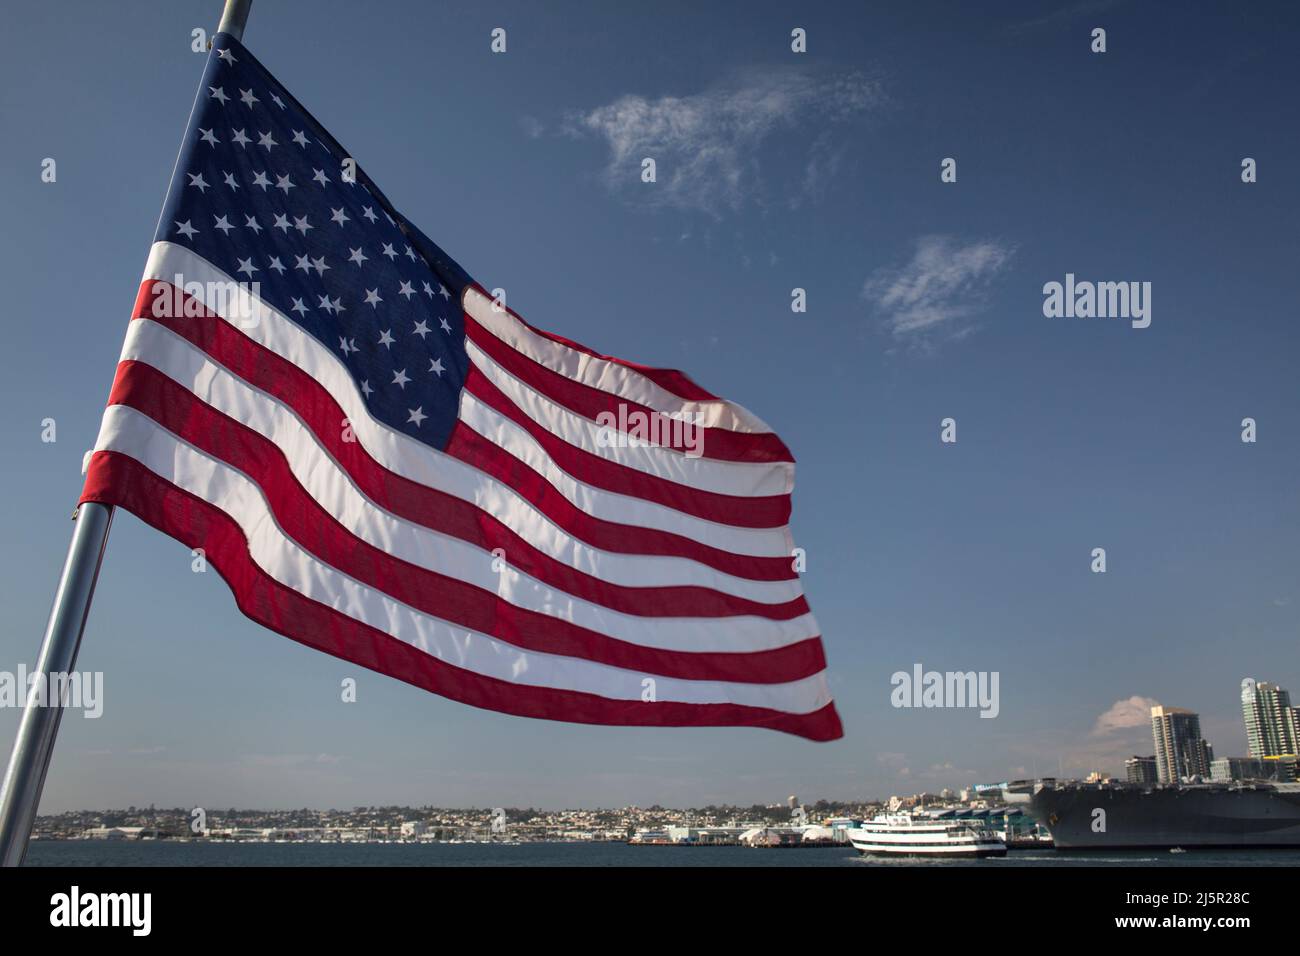 Close-up view of the American flag on a ferry, San Diego Bay Stock Photo